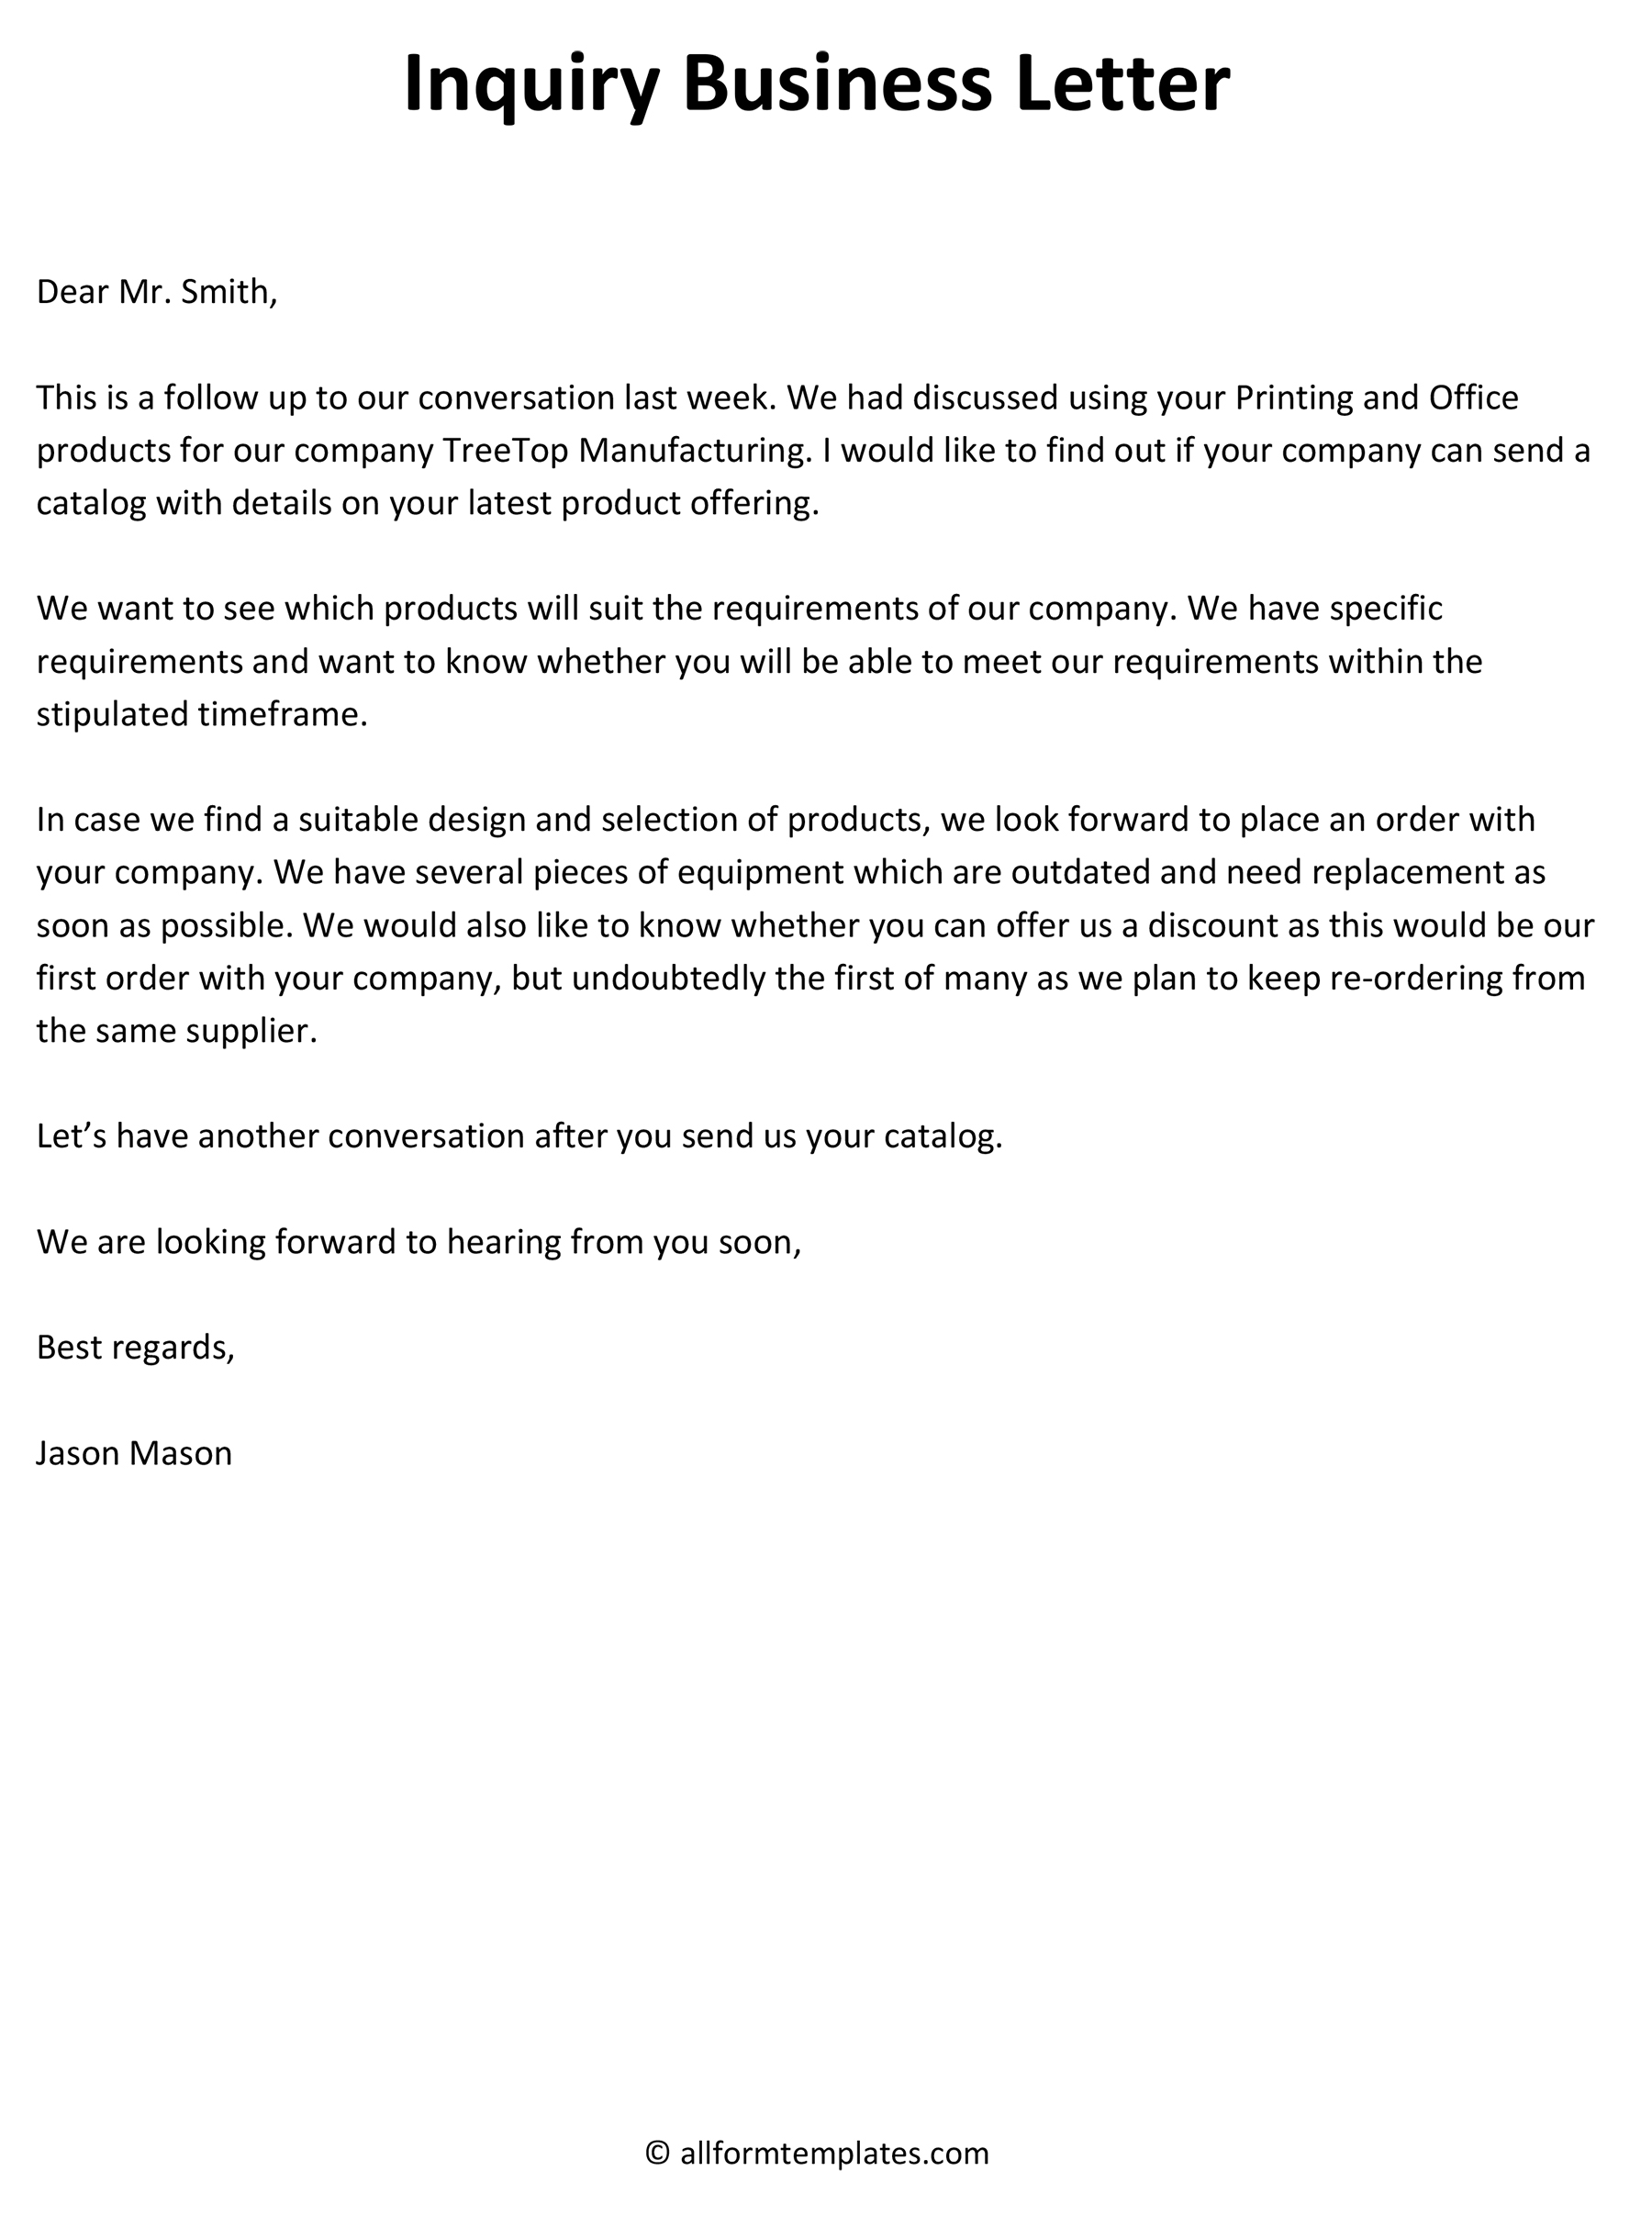 Inquiry-Business-Letter-01-HD